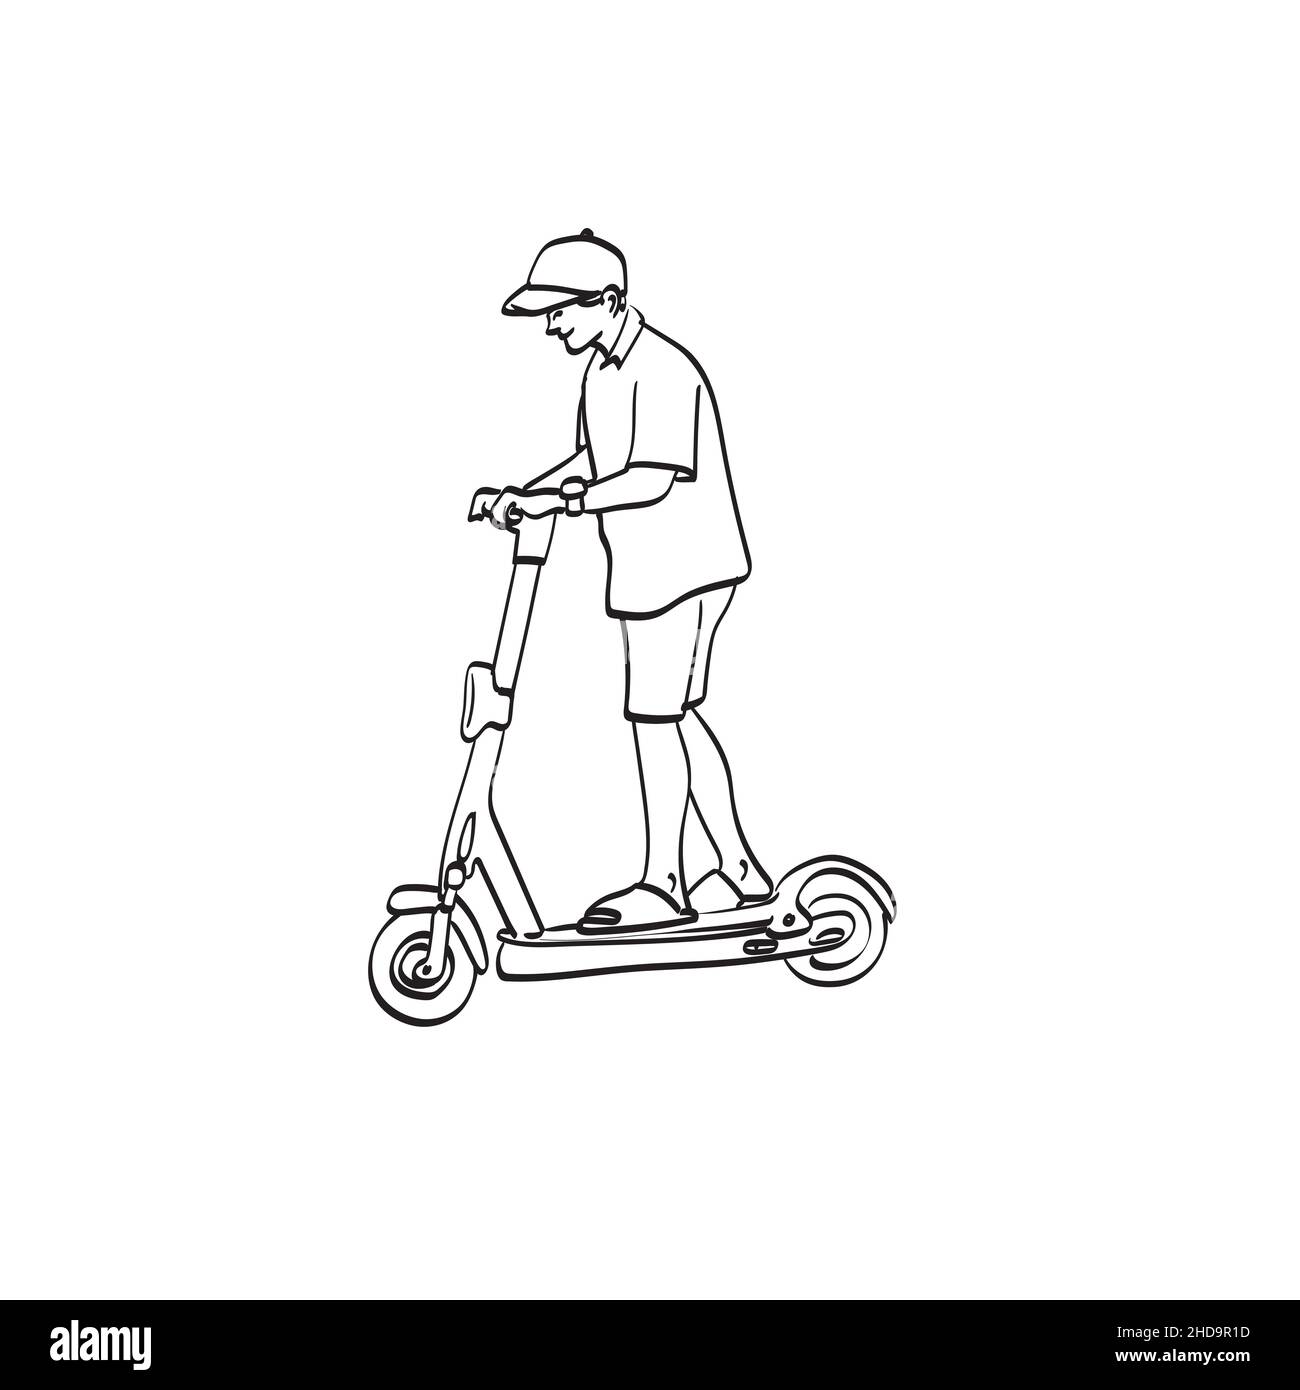 line art man with cap riding an e-scooter illustration vector hand drawn isolated on white background Stock Vector